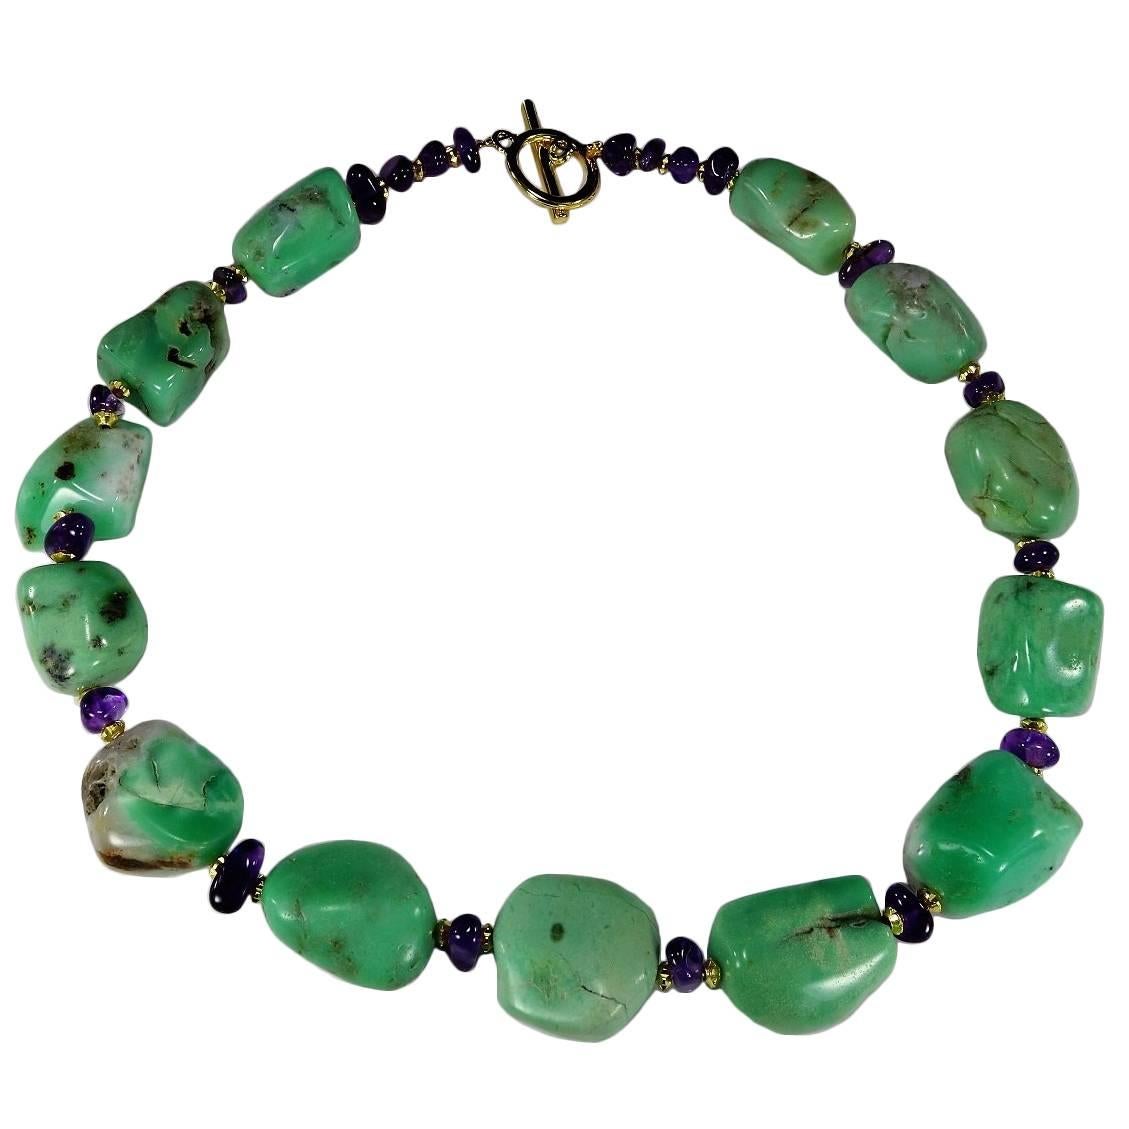 Custom made Necklace of Polished Amethyst Pebbles and Polished Chrysoprase Nuggets with fluted gold tone accents.    Purple and Green together are beautiful!  These Chysoprase nuggets are 25x20 to 23x17mm.  This unique  necklace is secured with a